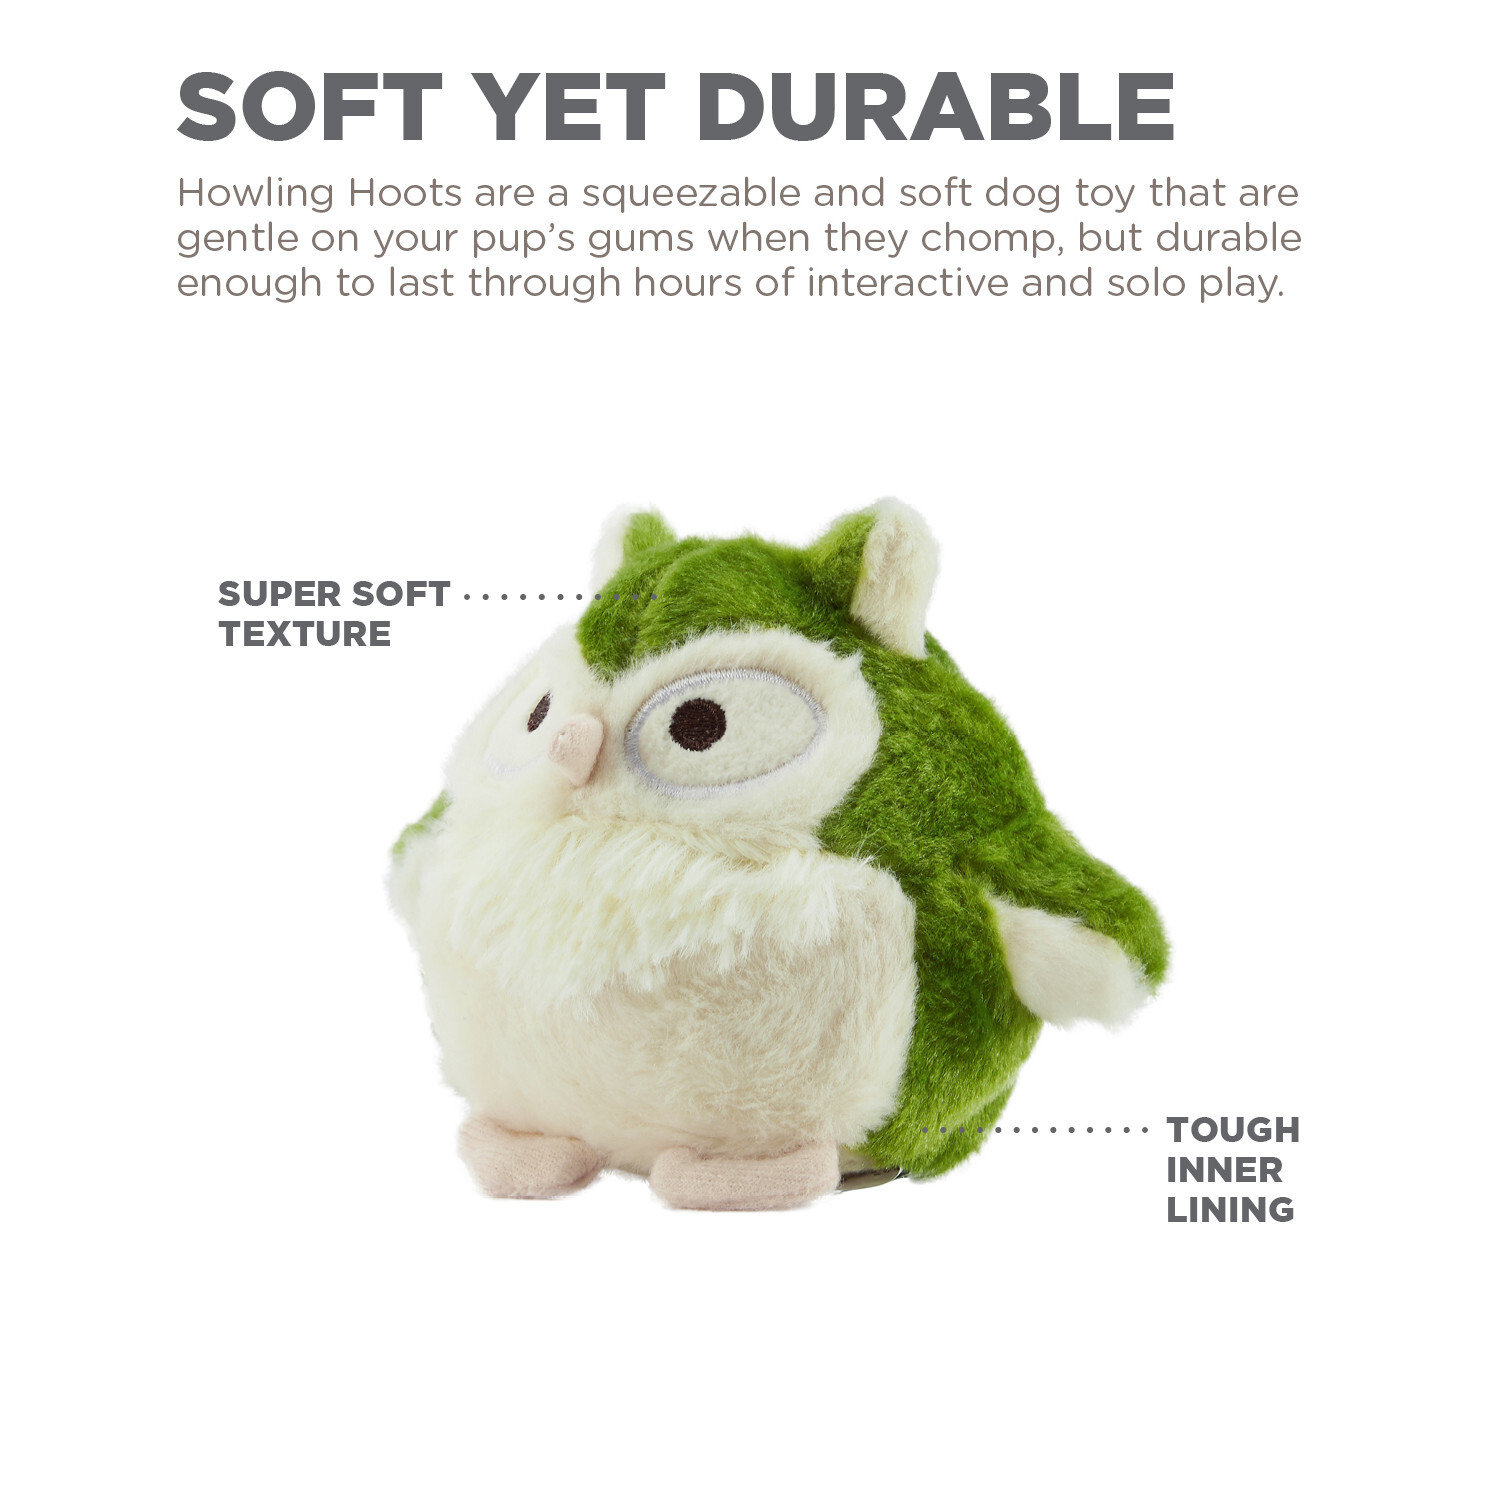 Outward Hound Durable Plush Dog Toy - Howling Hoots image 13